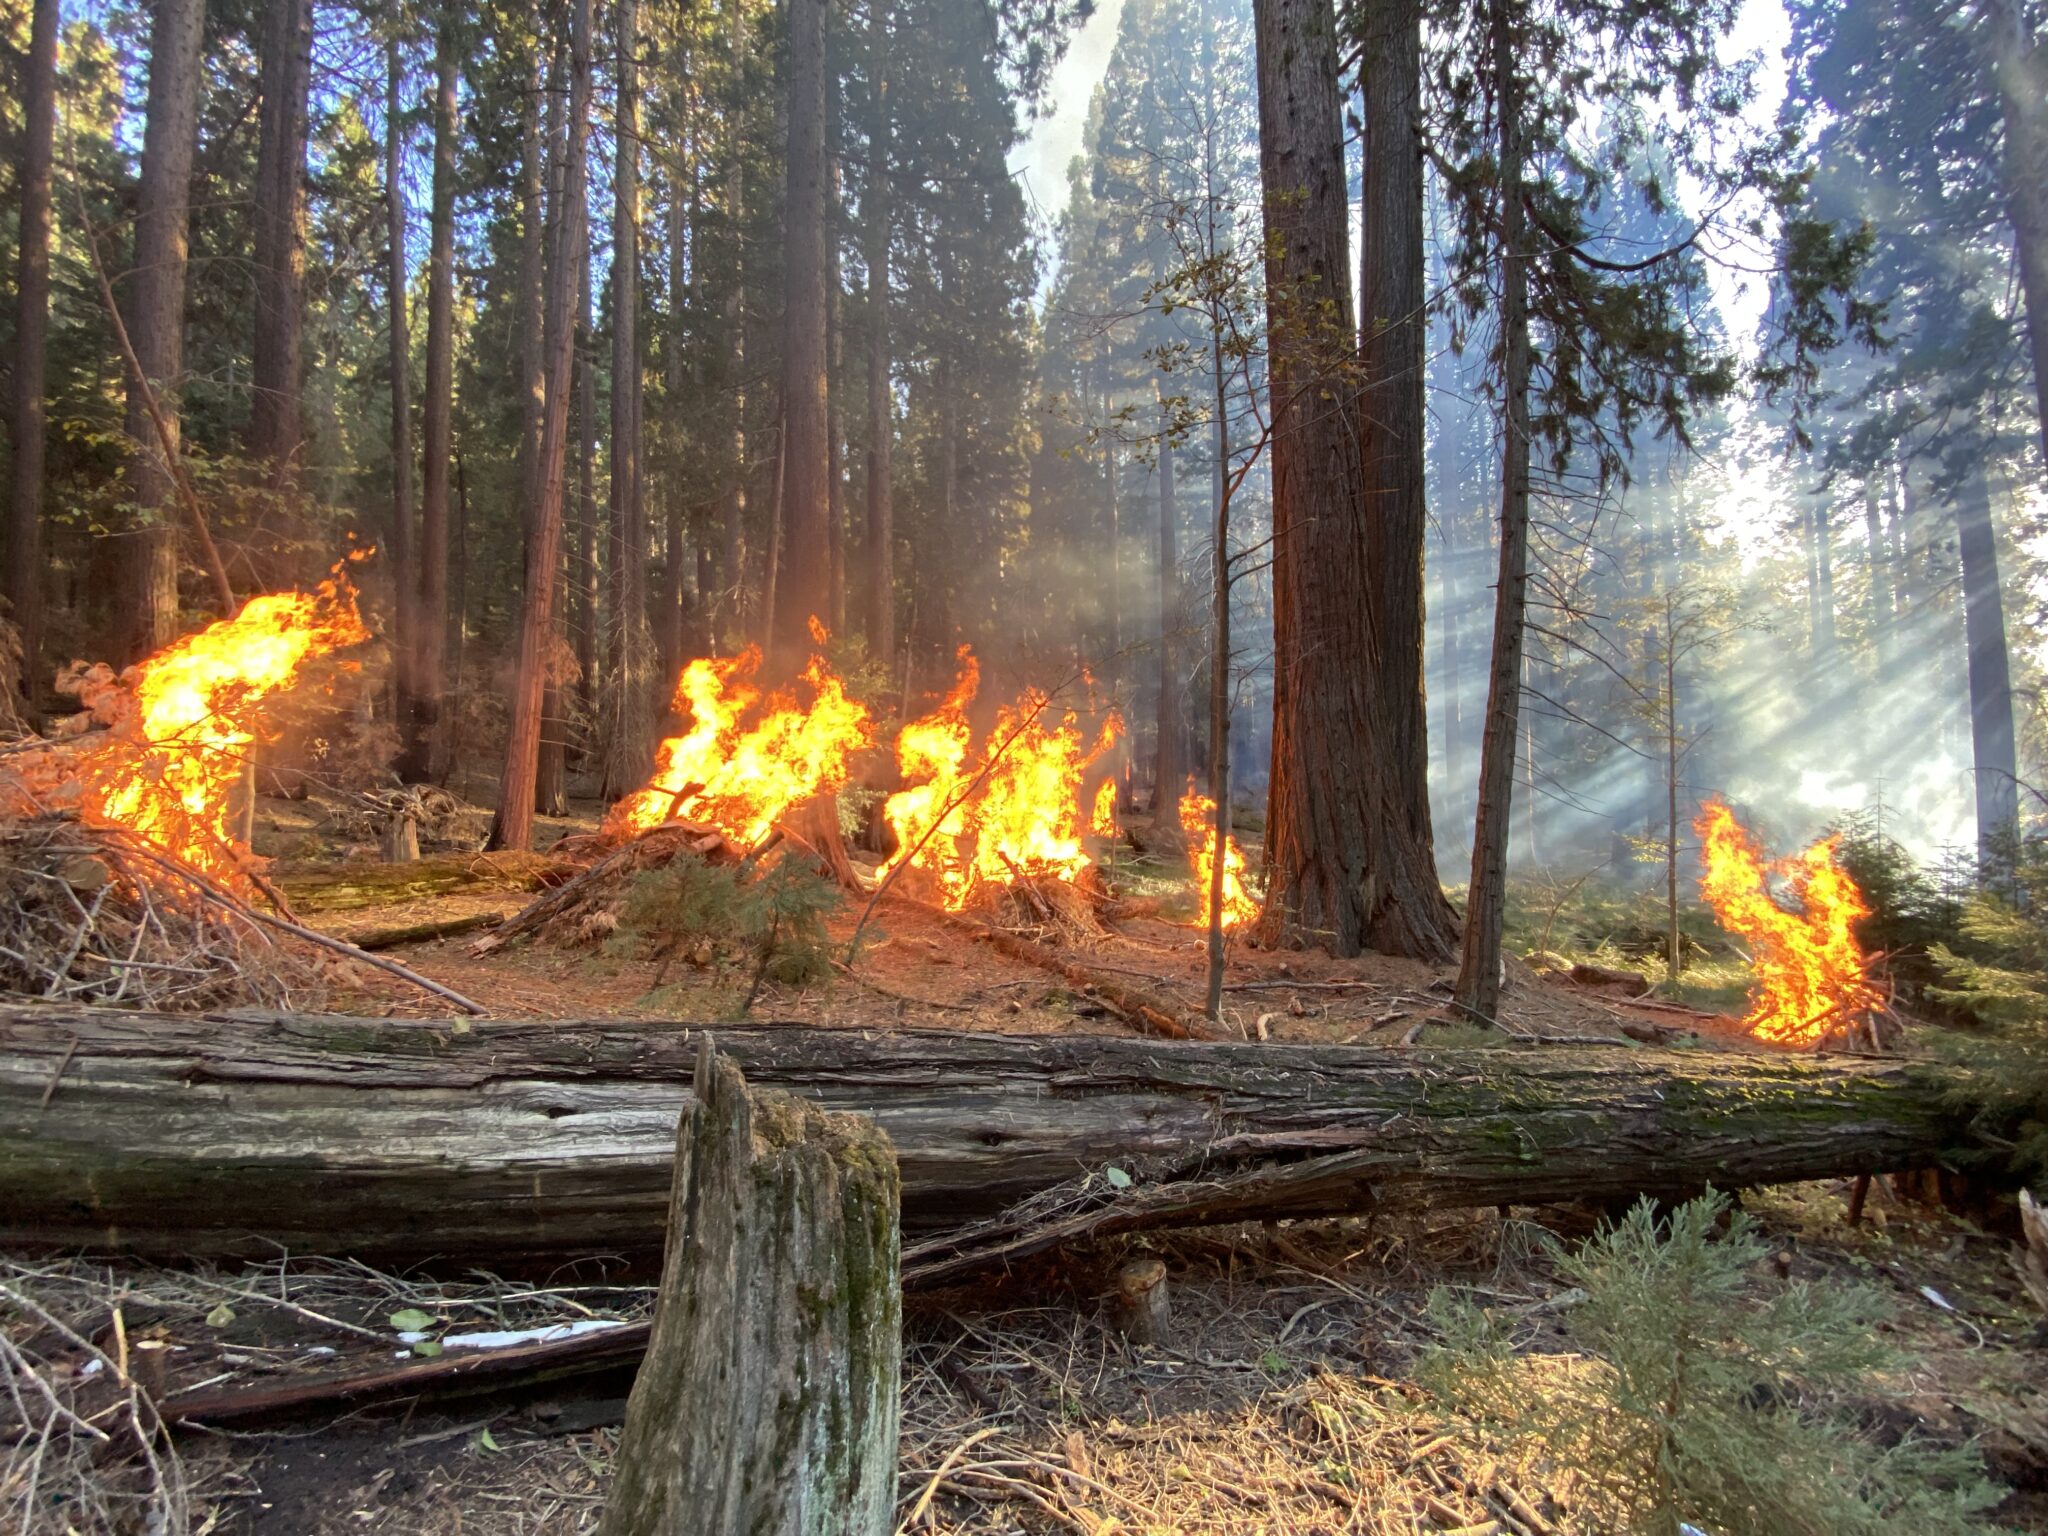 Pile burning in Whitaker’s Research Forest within Redwood Mountain Grove. Photo by Rob York, University of California, Berkeley